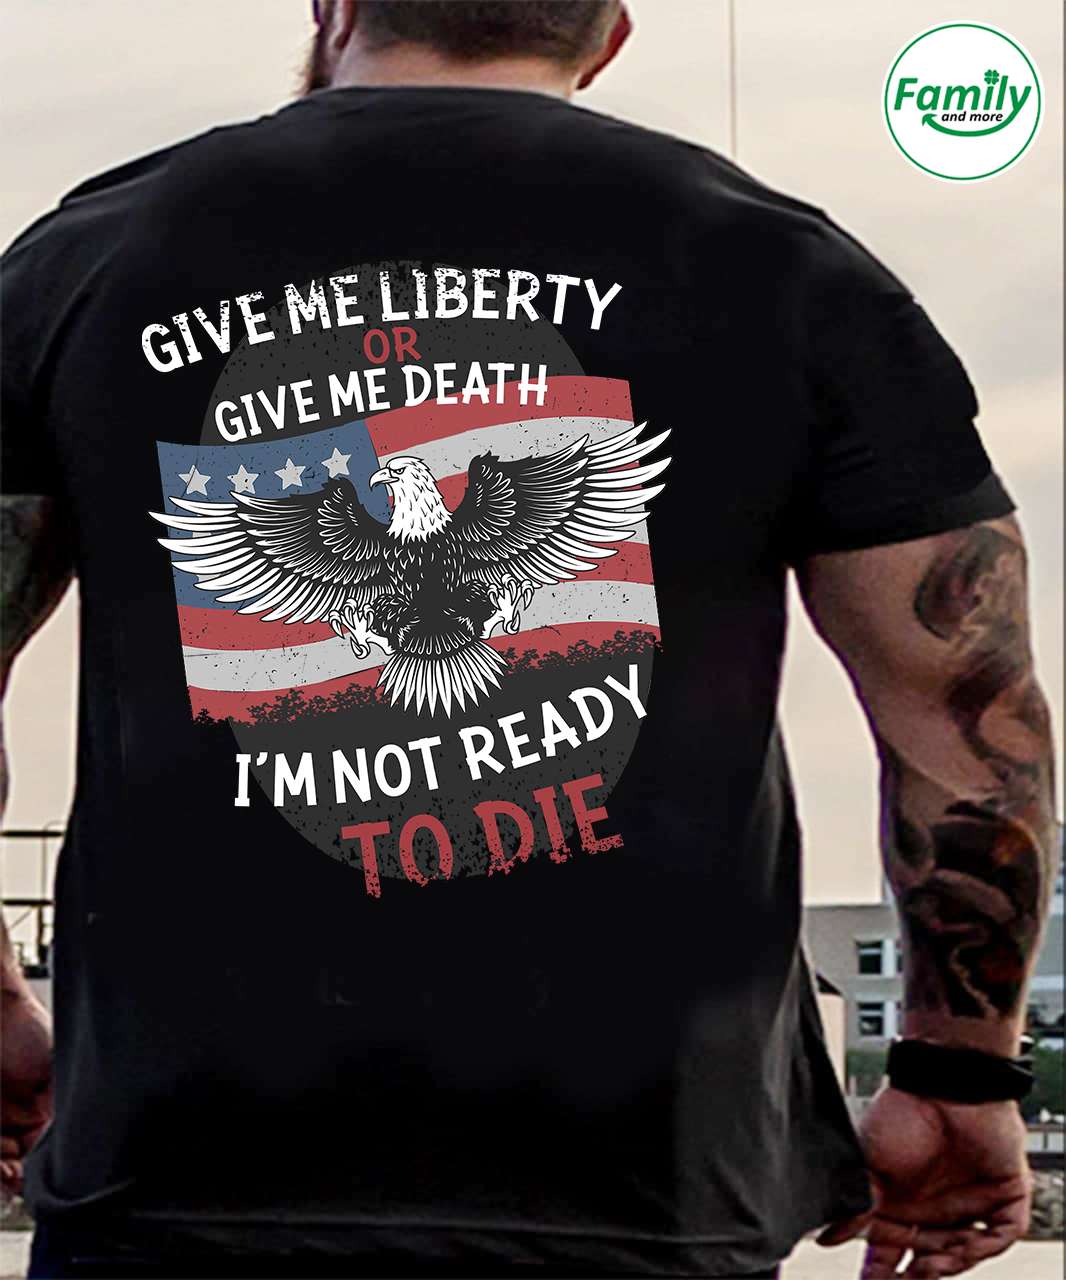 Give me liberty or give me death - I'm not ready to die, American loves freedom